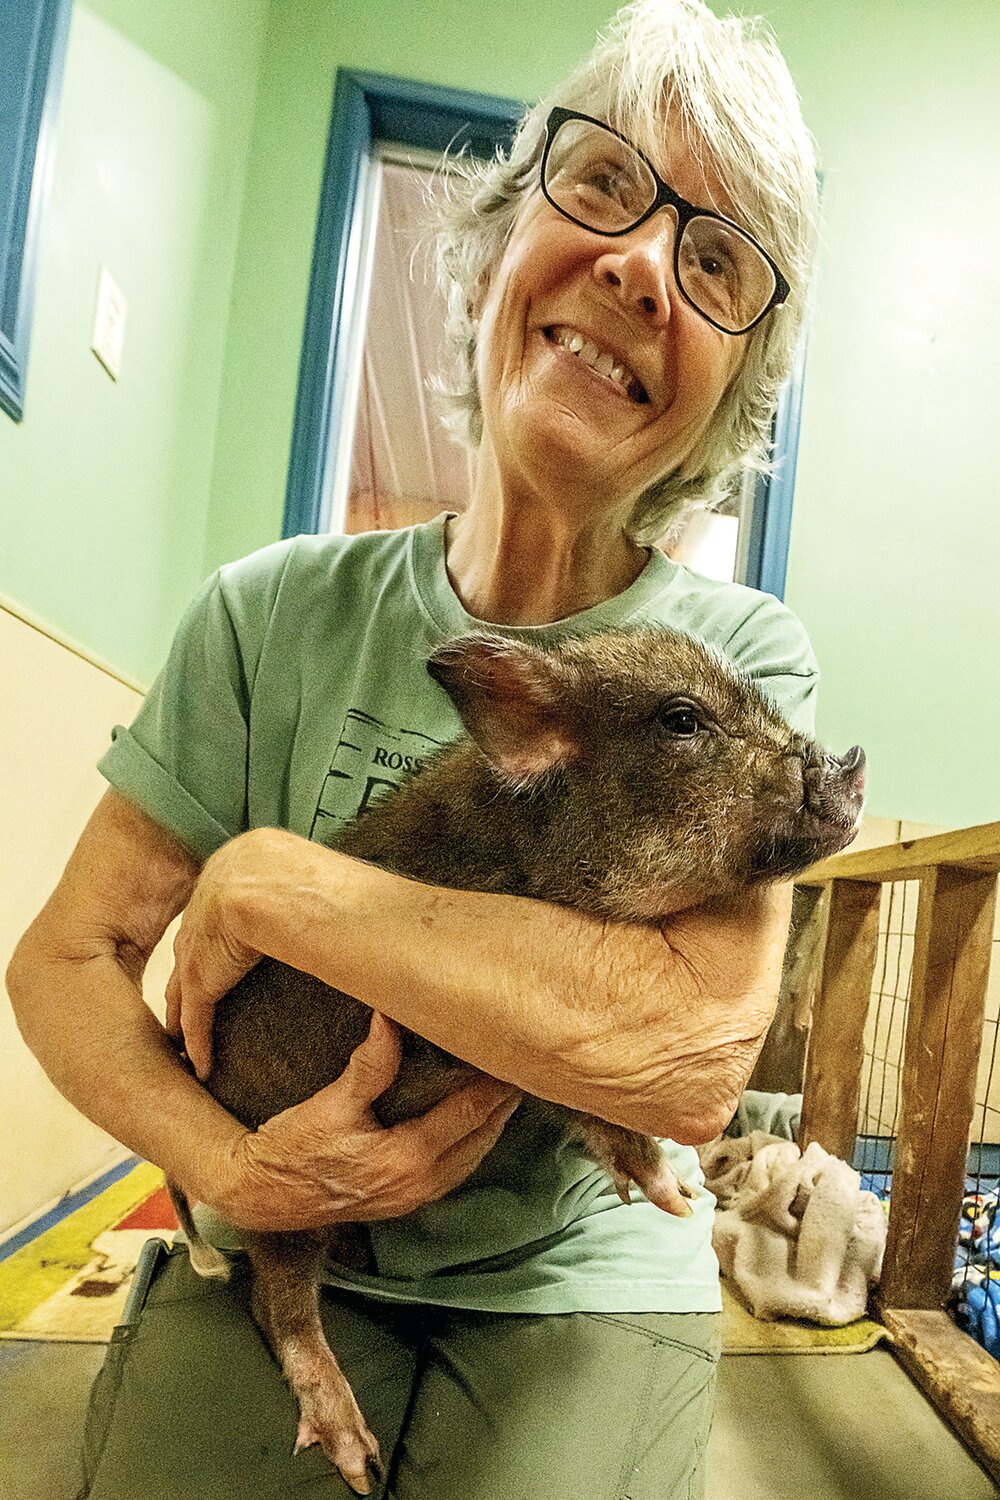 Susan Magidson, founder and owner of Ross Mill Farm, holds a piglet named Jack, who was rescued with his sister from a home. Both pigs suffered from neglect. Jack’s sister died.